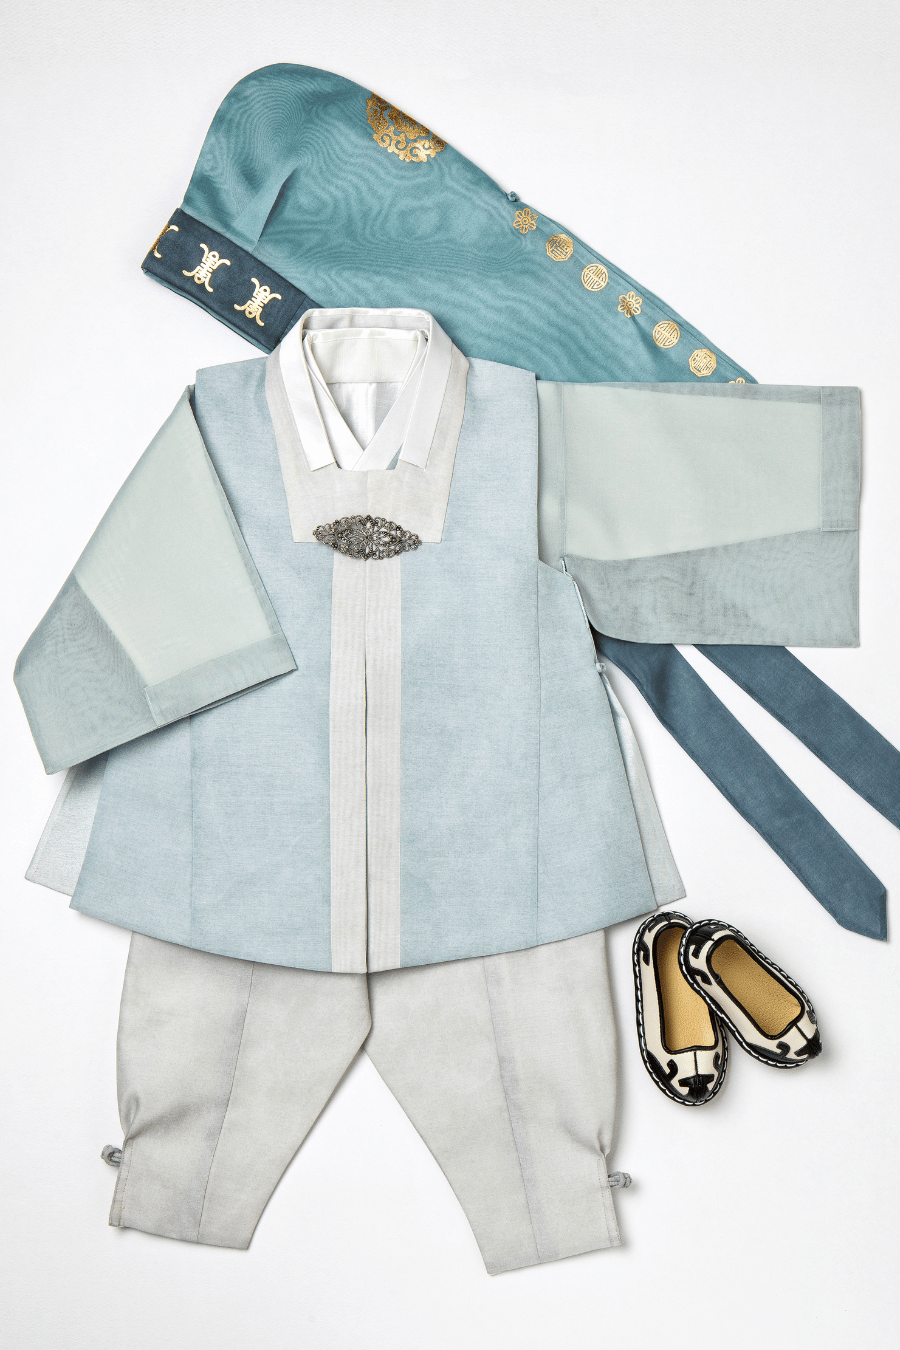 Baby Boy's Dohl Hanbok #31 (luxe line)